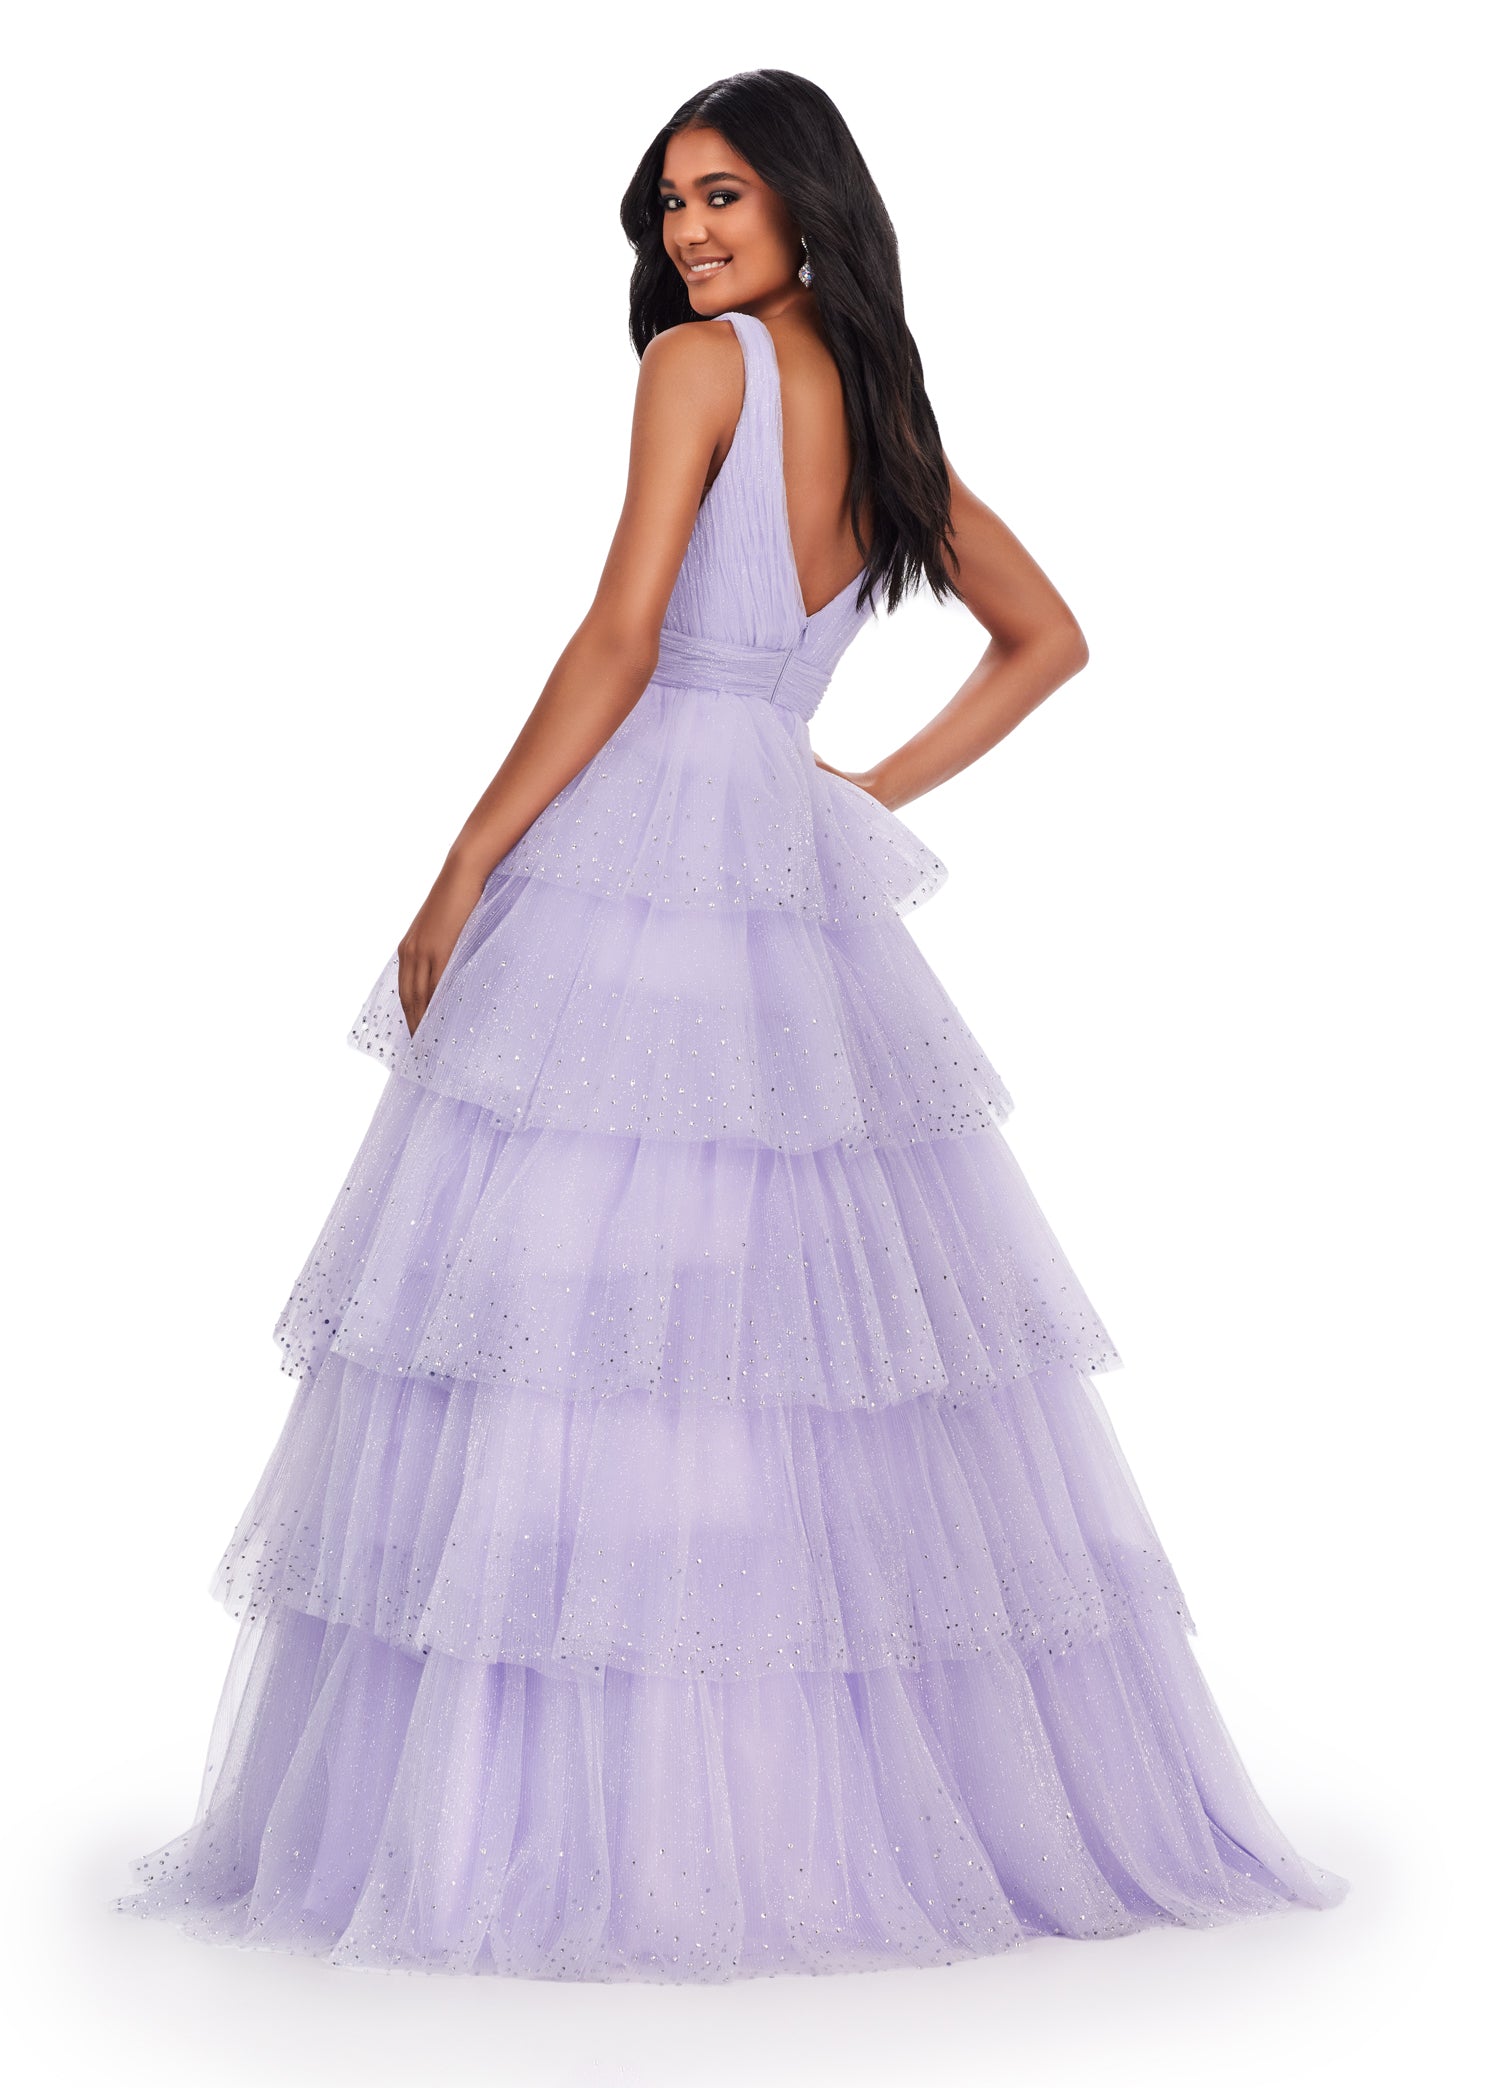 Ashley Lauren 11672 Long Layered Tulle Crystal Ball Gown Prom Dress Formal Pageant You are sure to stand out in this glitter tulle v-neckline ball gown! The glitter tulle is sure to sparkle with the added heat-set stones throughout the multi-tiered skirt.  COLORS: Lilac, Sky, Black, Hot Pink Sizes: 00-24 V-Neckline V-Back A-Line Tiered Ruffle Skirt